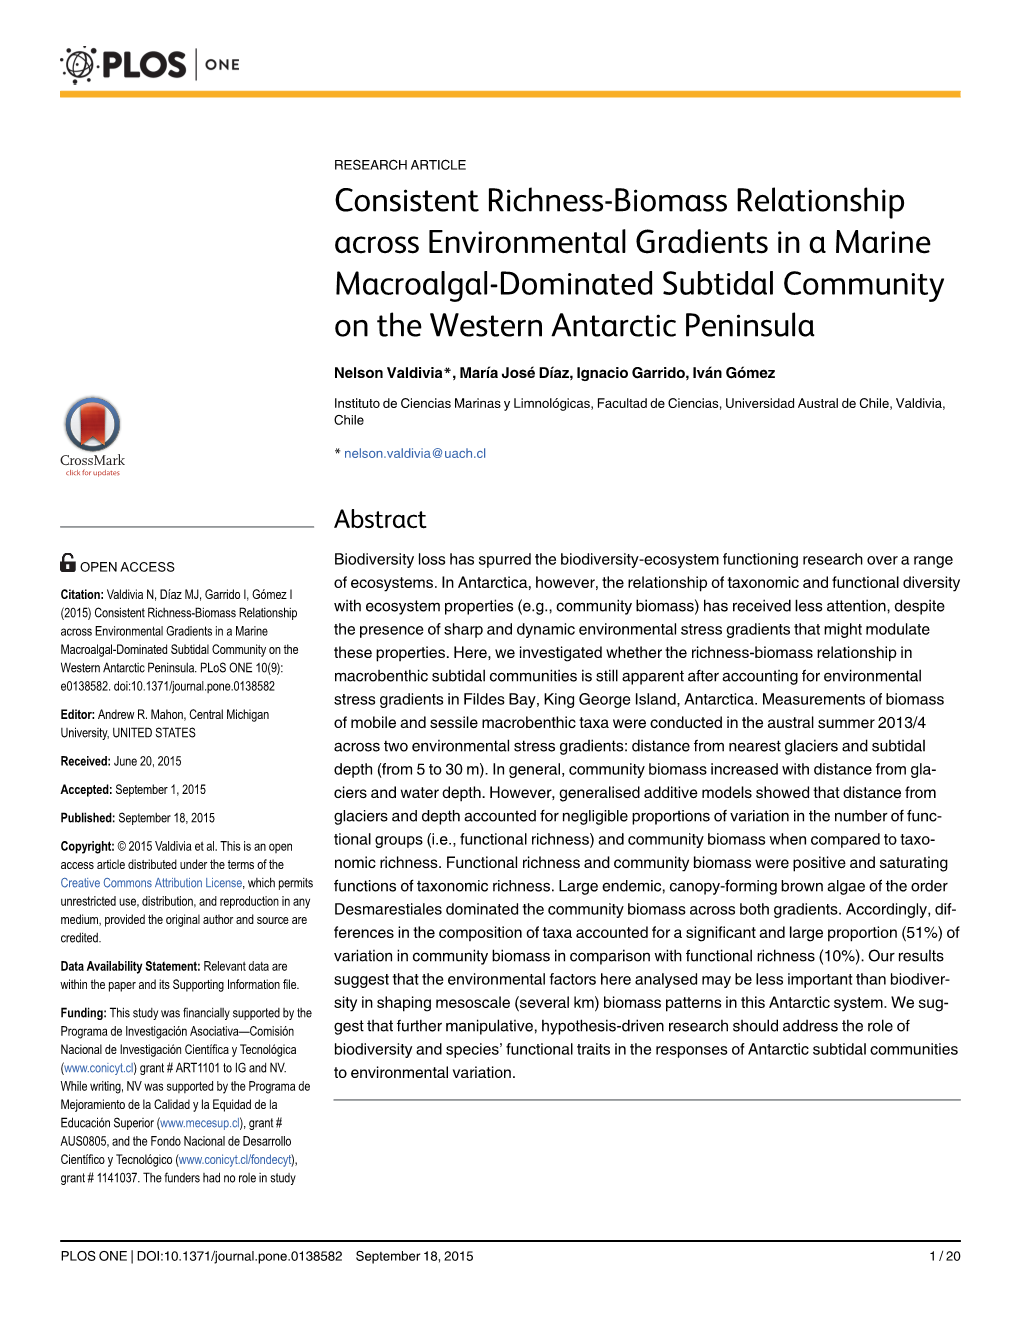 Consistent Richness-Biomass Relationship Across Environmental Gradients in a Marine Macroalgal-Dominated Subtidal Community on the Western Antarctic Peninsula